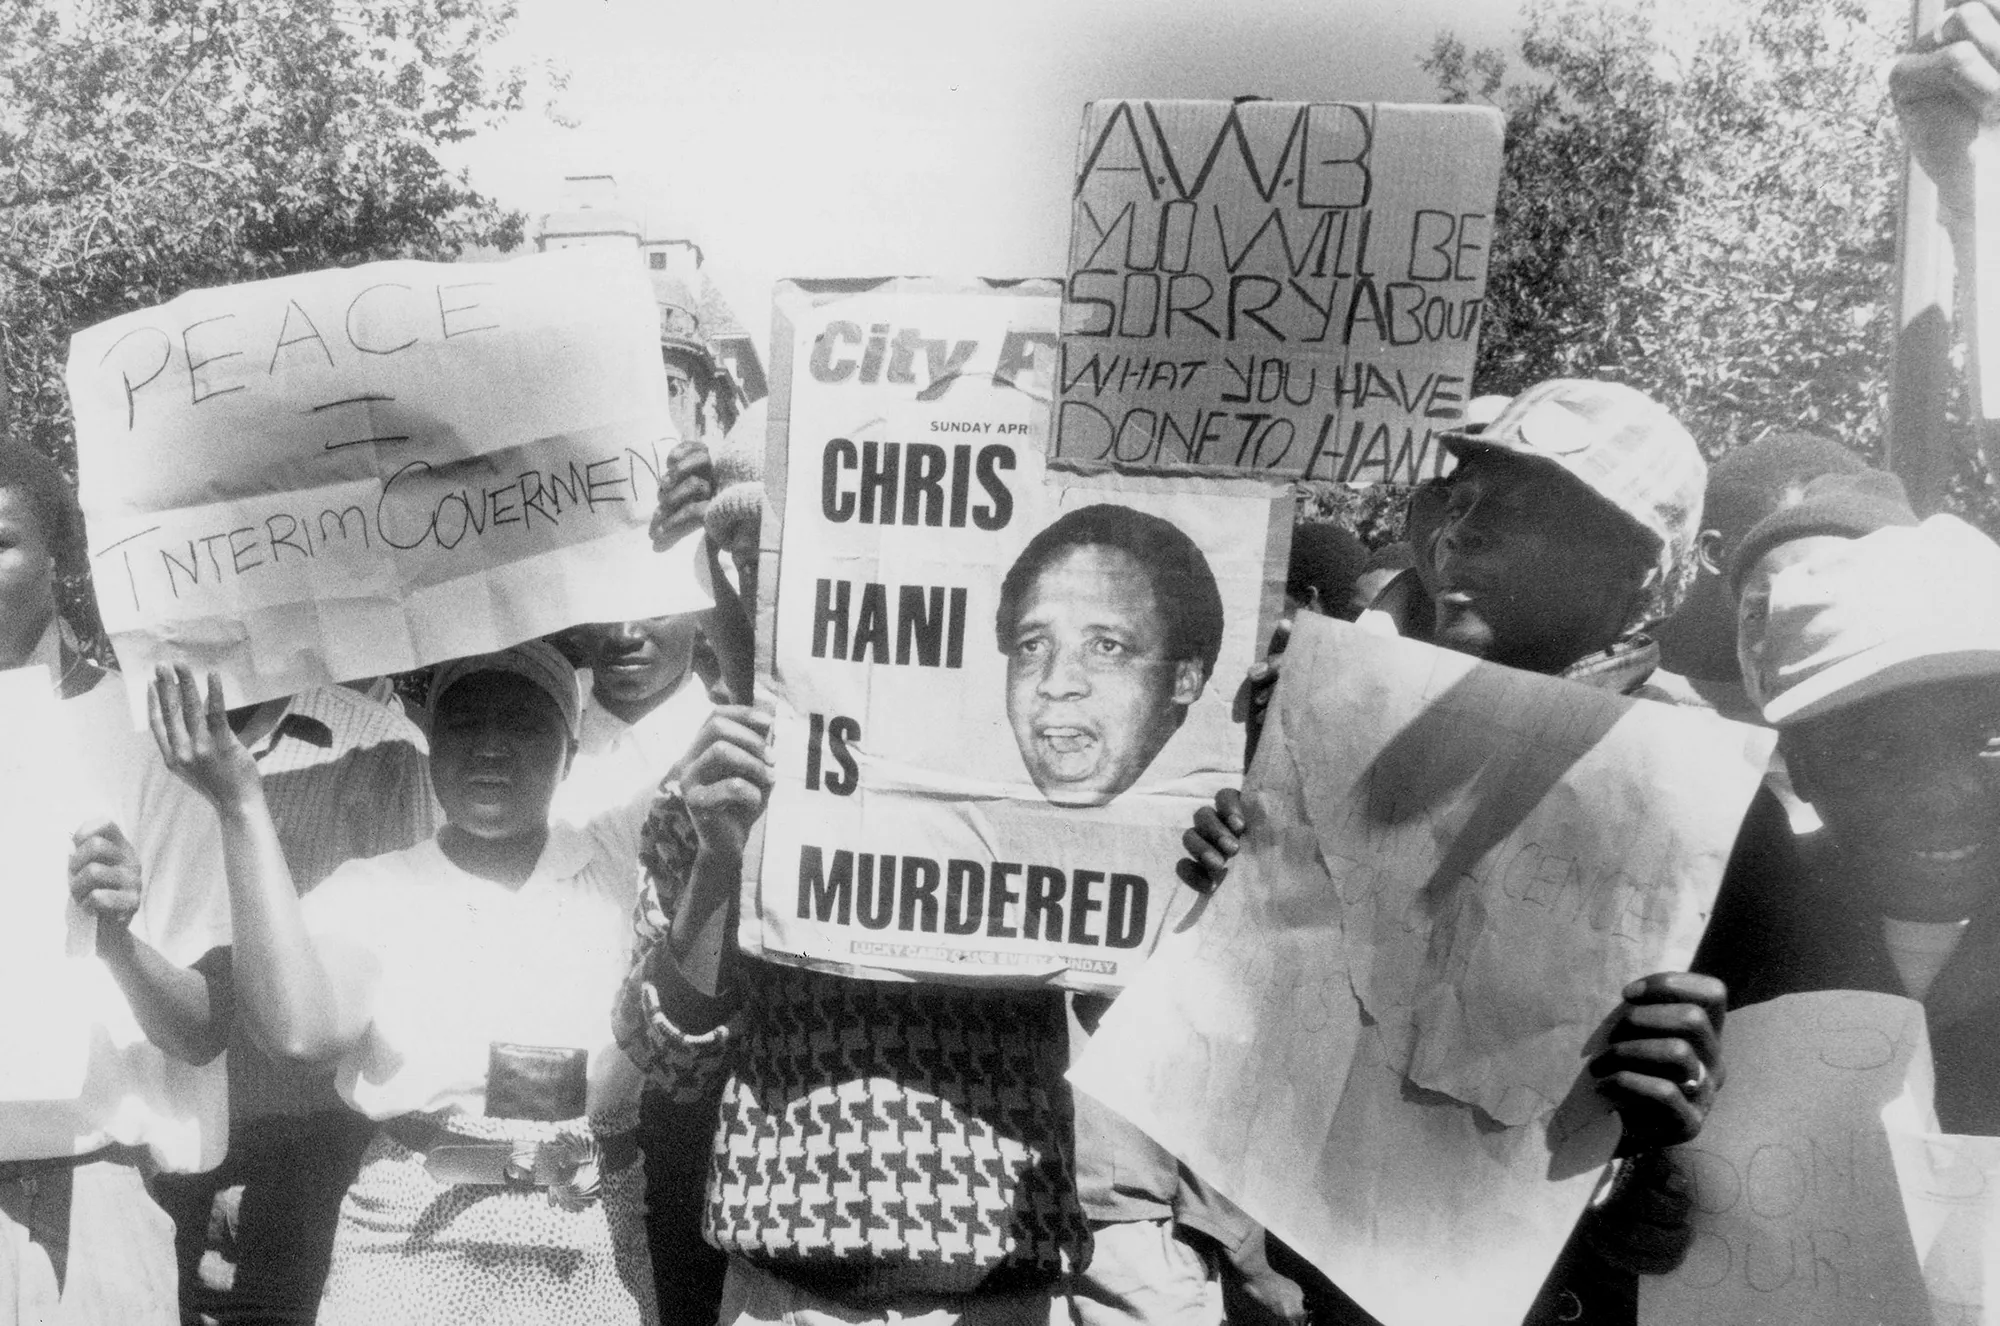 Protestors march through the streets after Chris Hani's assassination